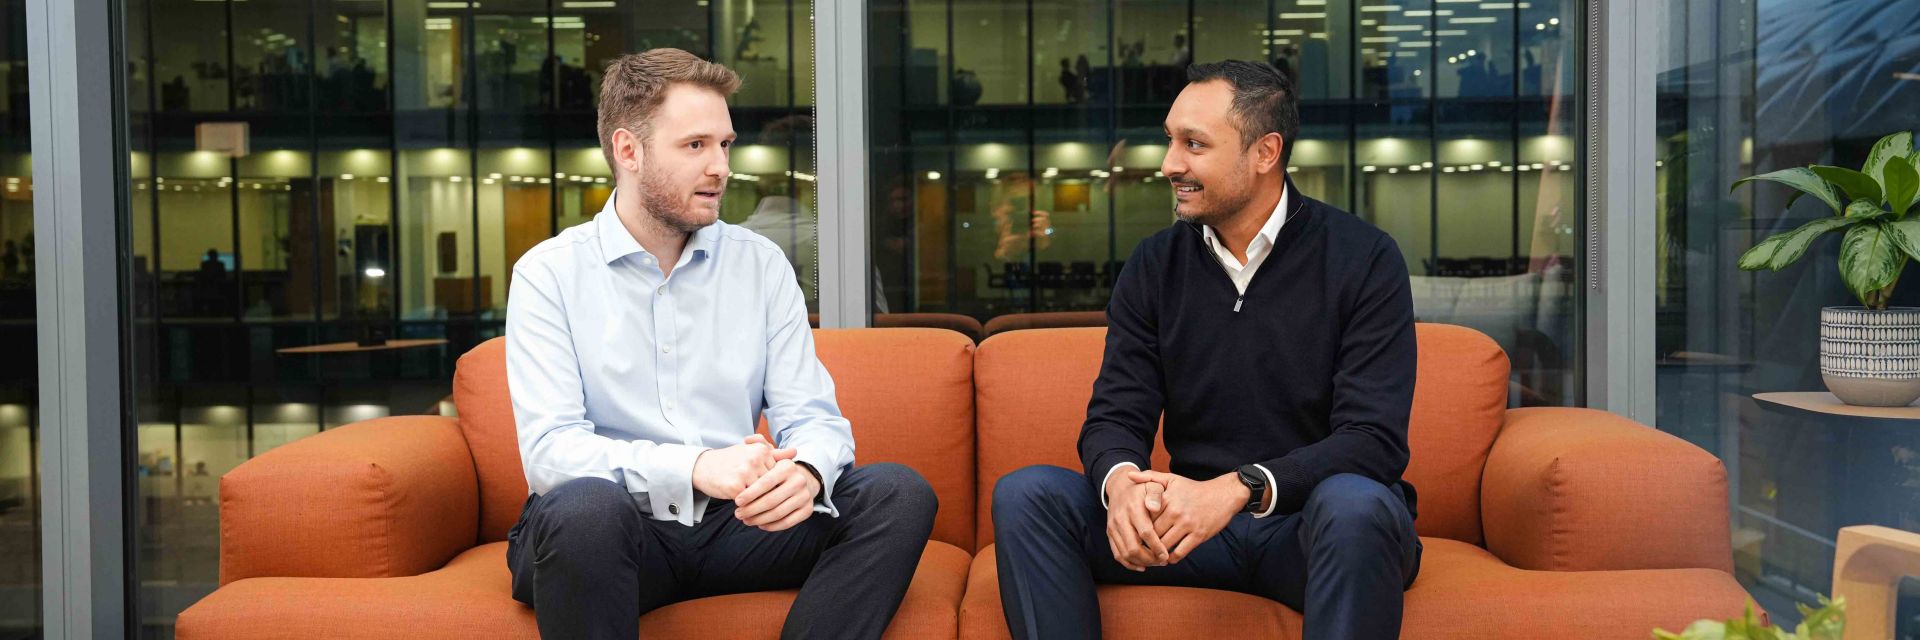 Laurence Beard, Remediation Analyst and Rajendra Singh, Digital Product Owner.